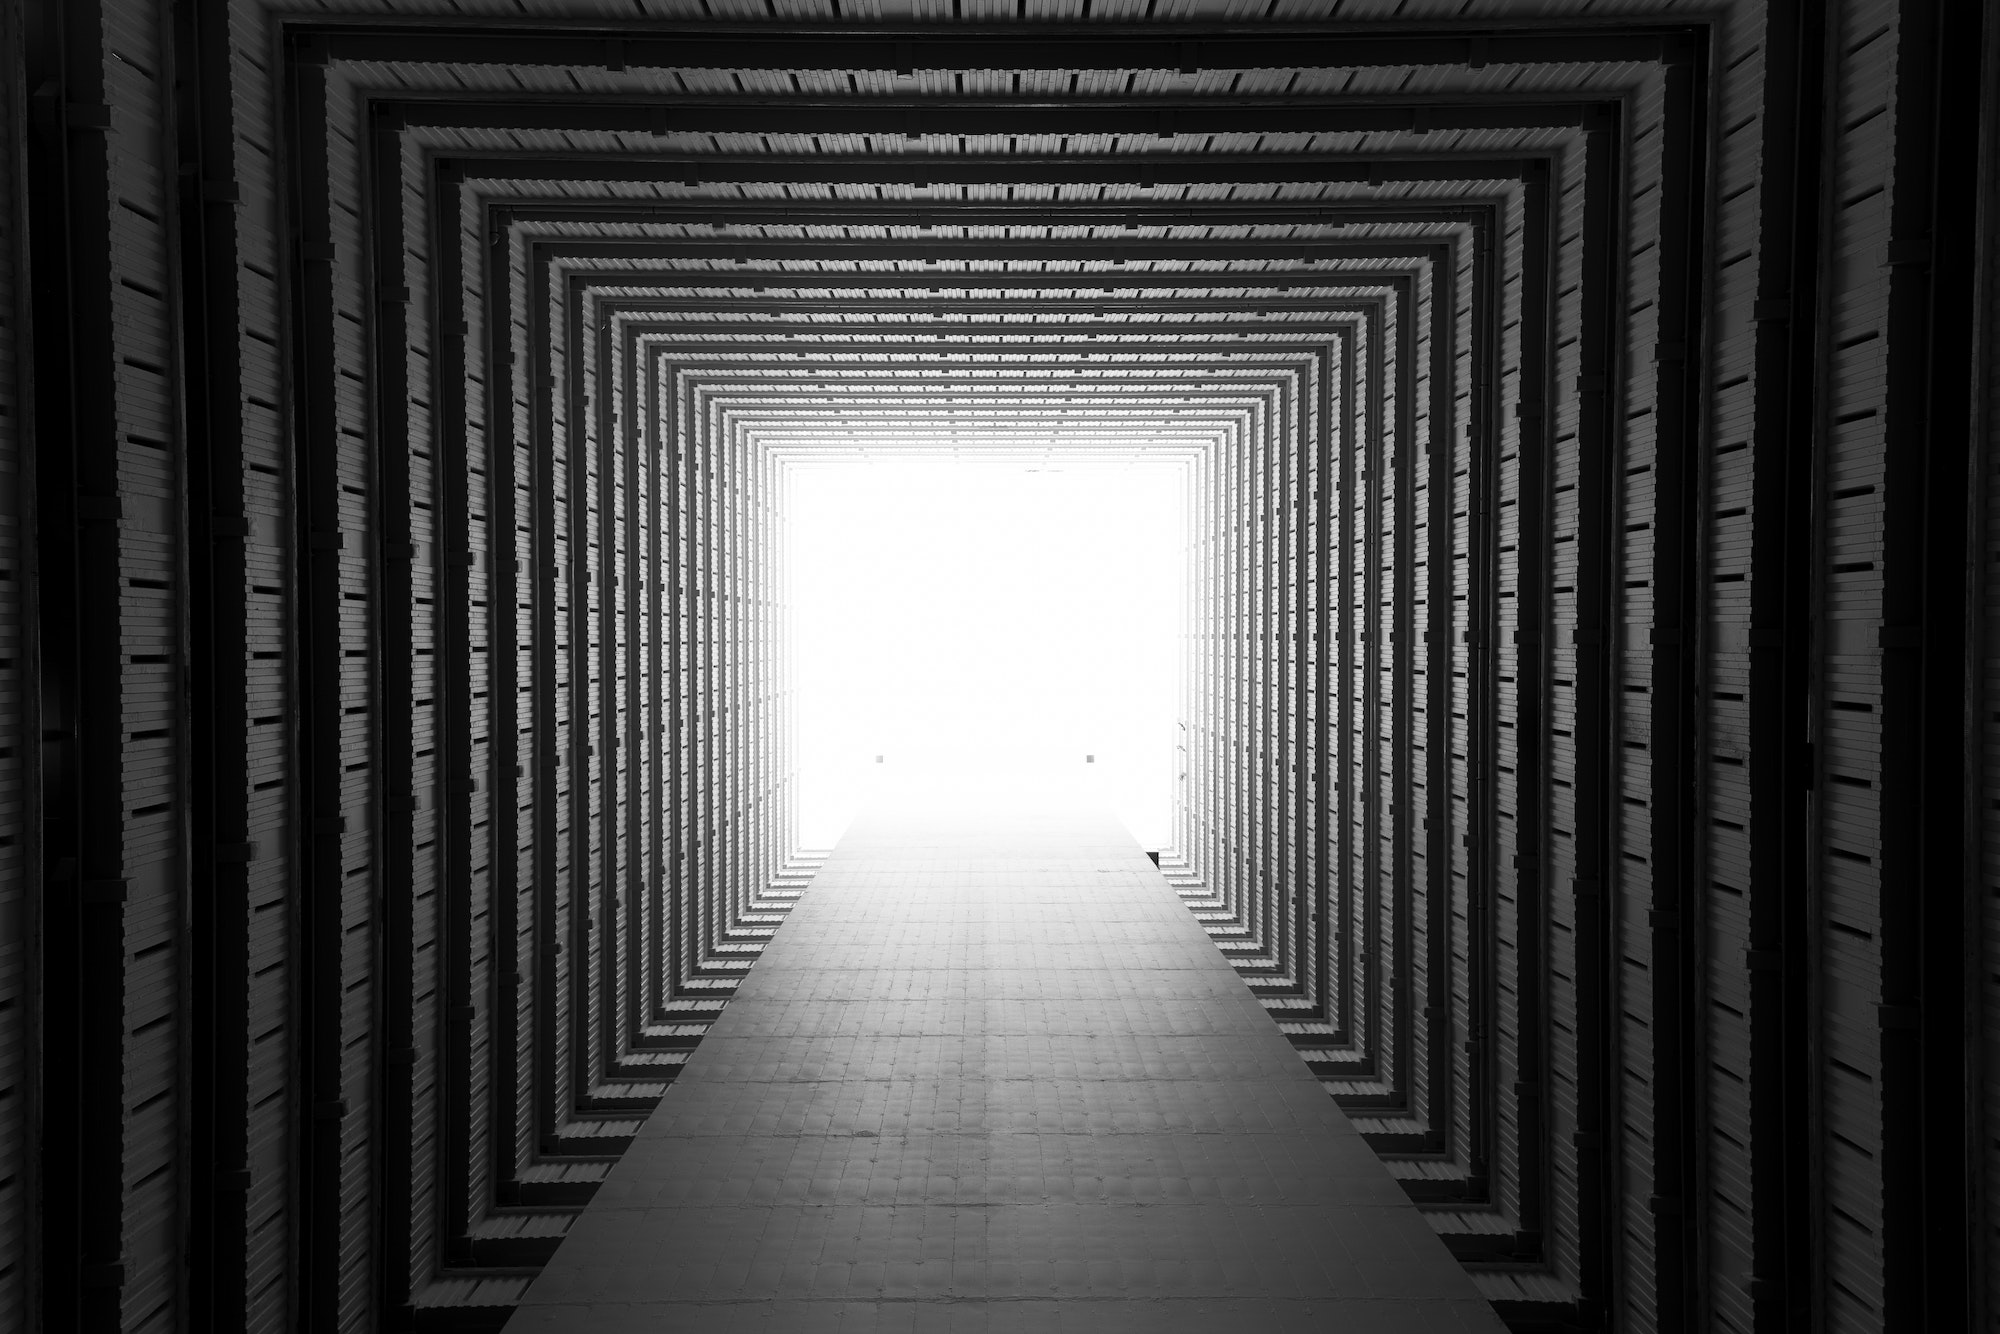 A view of Hong Kong buildings from the group looking up appears as if staring down a long corridor